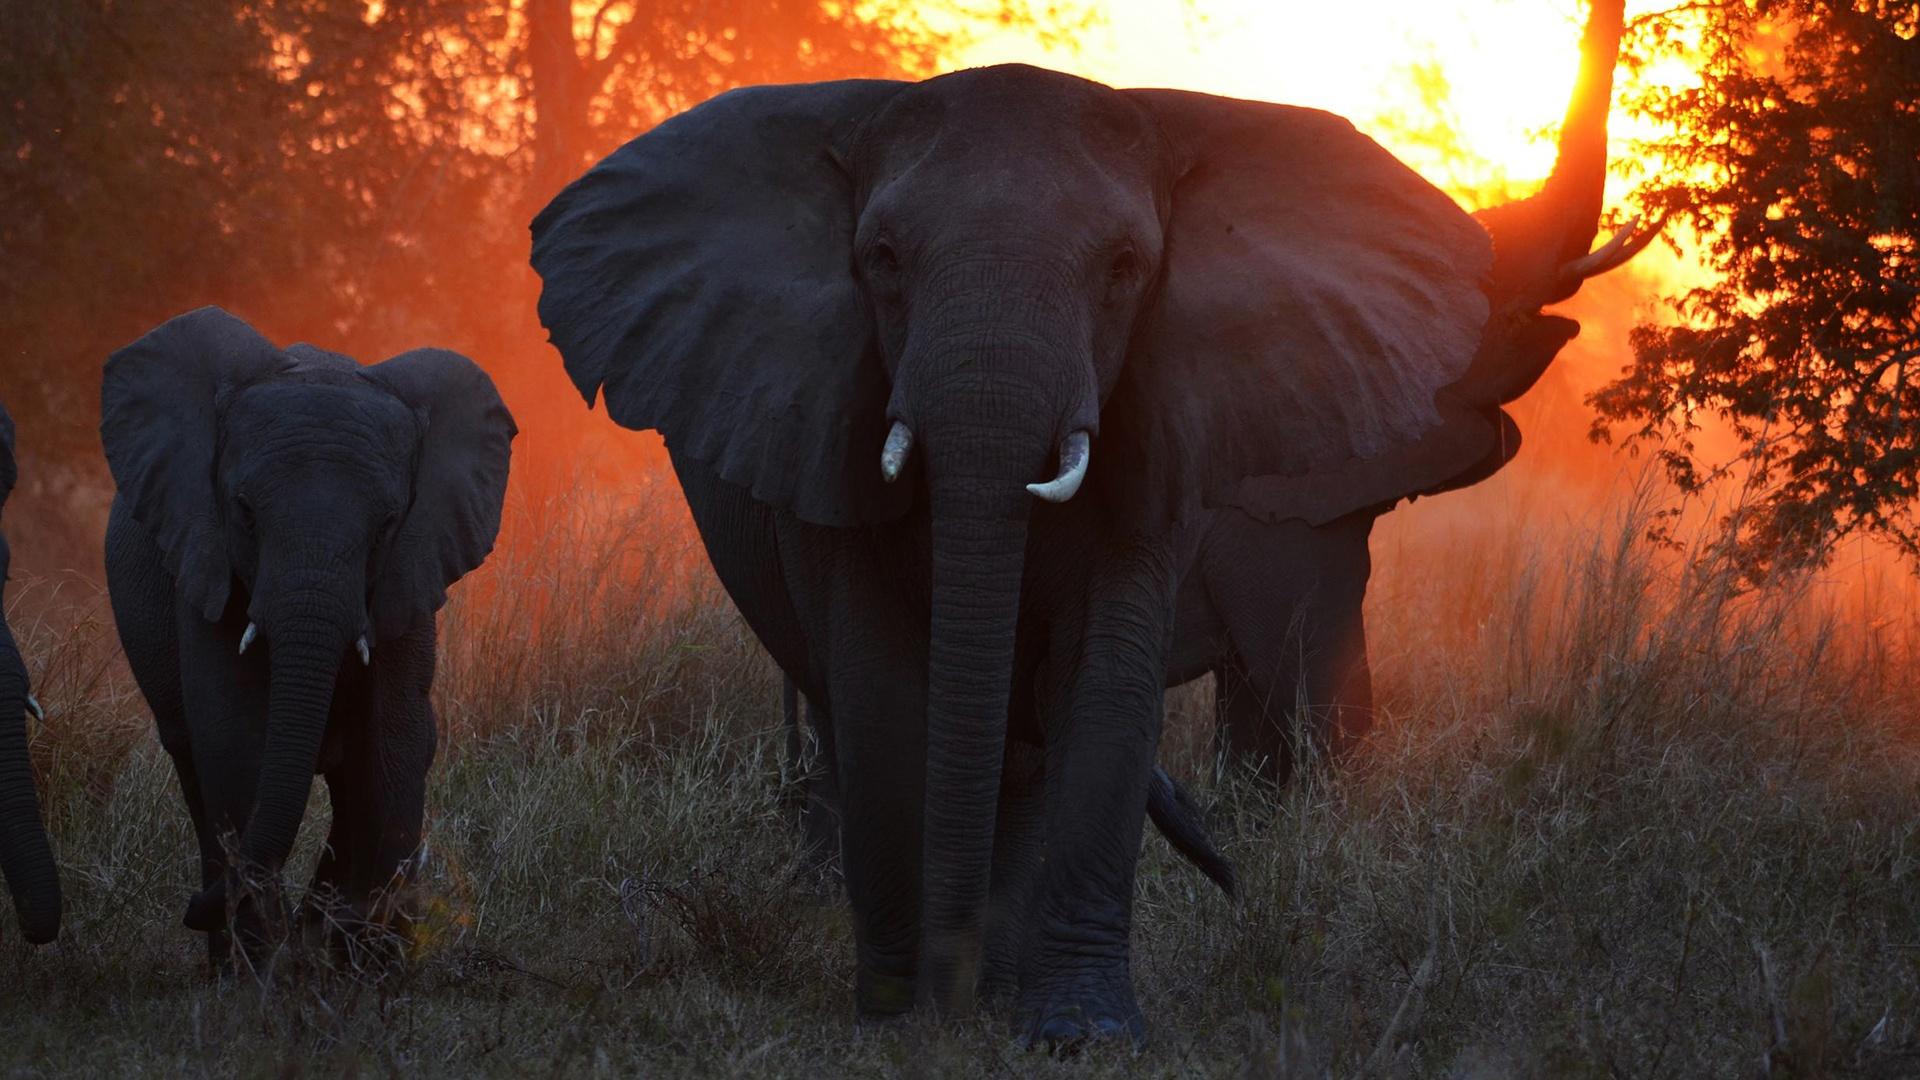 After years of civil conflict and poaching, Gorongosa elephants have grown weary of humans.